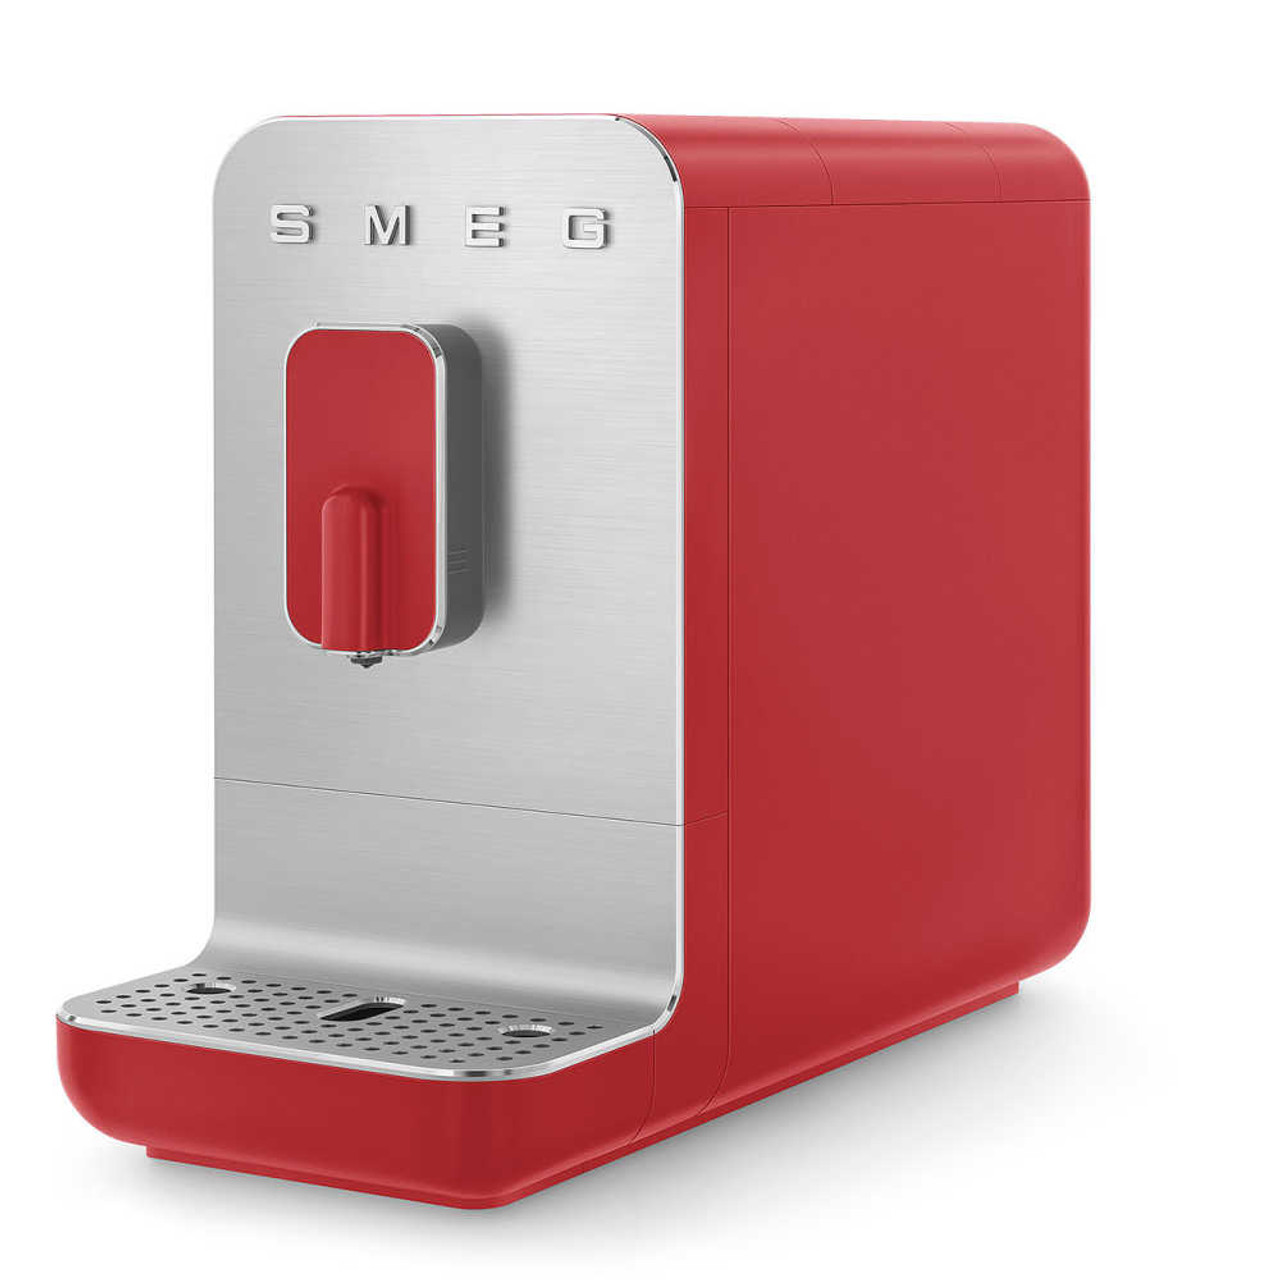 https://cdn11.bigcommerce.com/s-hccytny0od/images/stencil/1280x1280/products/4256/16158/smeg-espresso-coffee-machine-red-3_1__75728.1655577389.jpg?c=2?imbypass=on